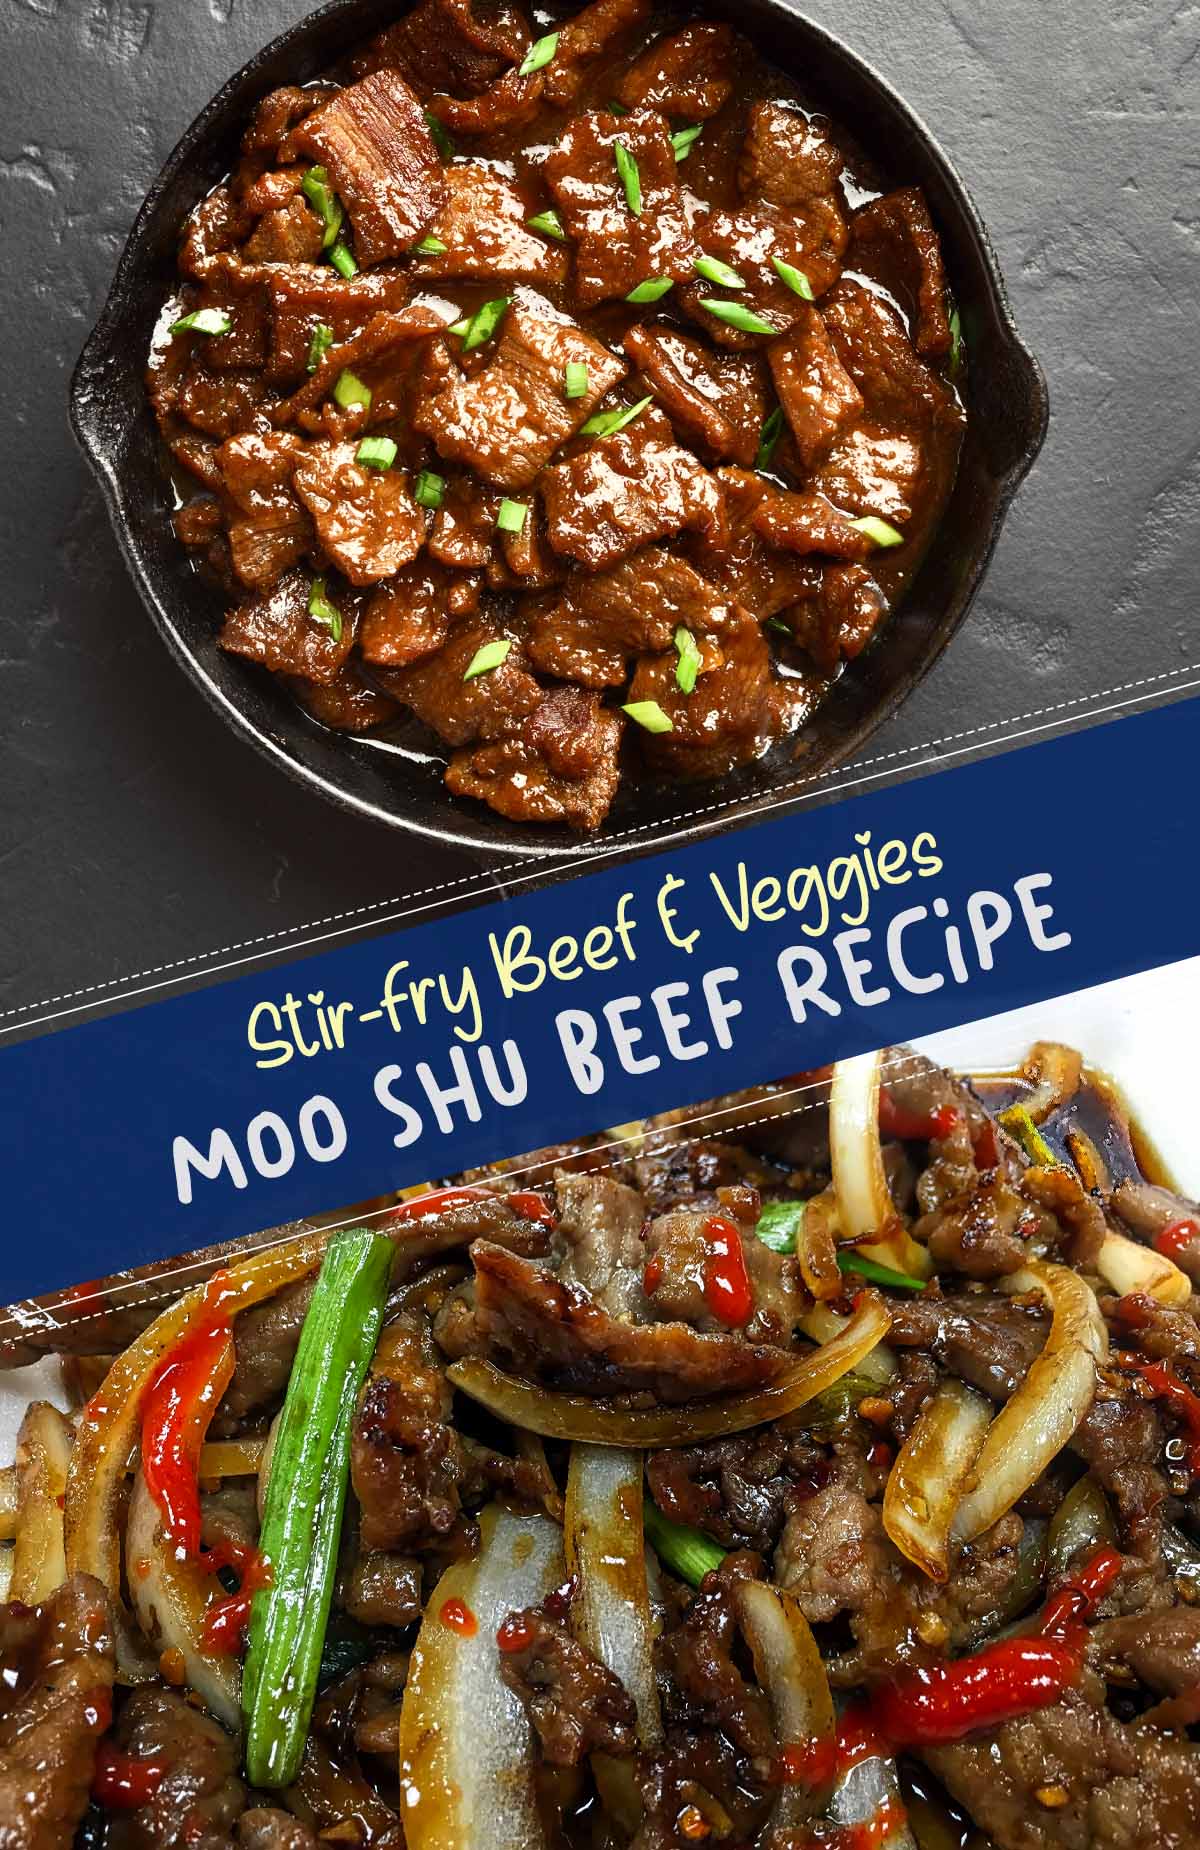 Moo Shu Beef is a classic Chinese dish featuring tender slices of marinated beef stir-fried with a colorful mix of vegetables and a delicious, savory hoisin sauce.